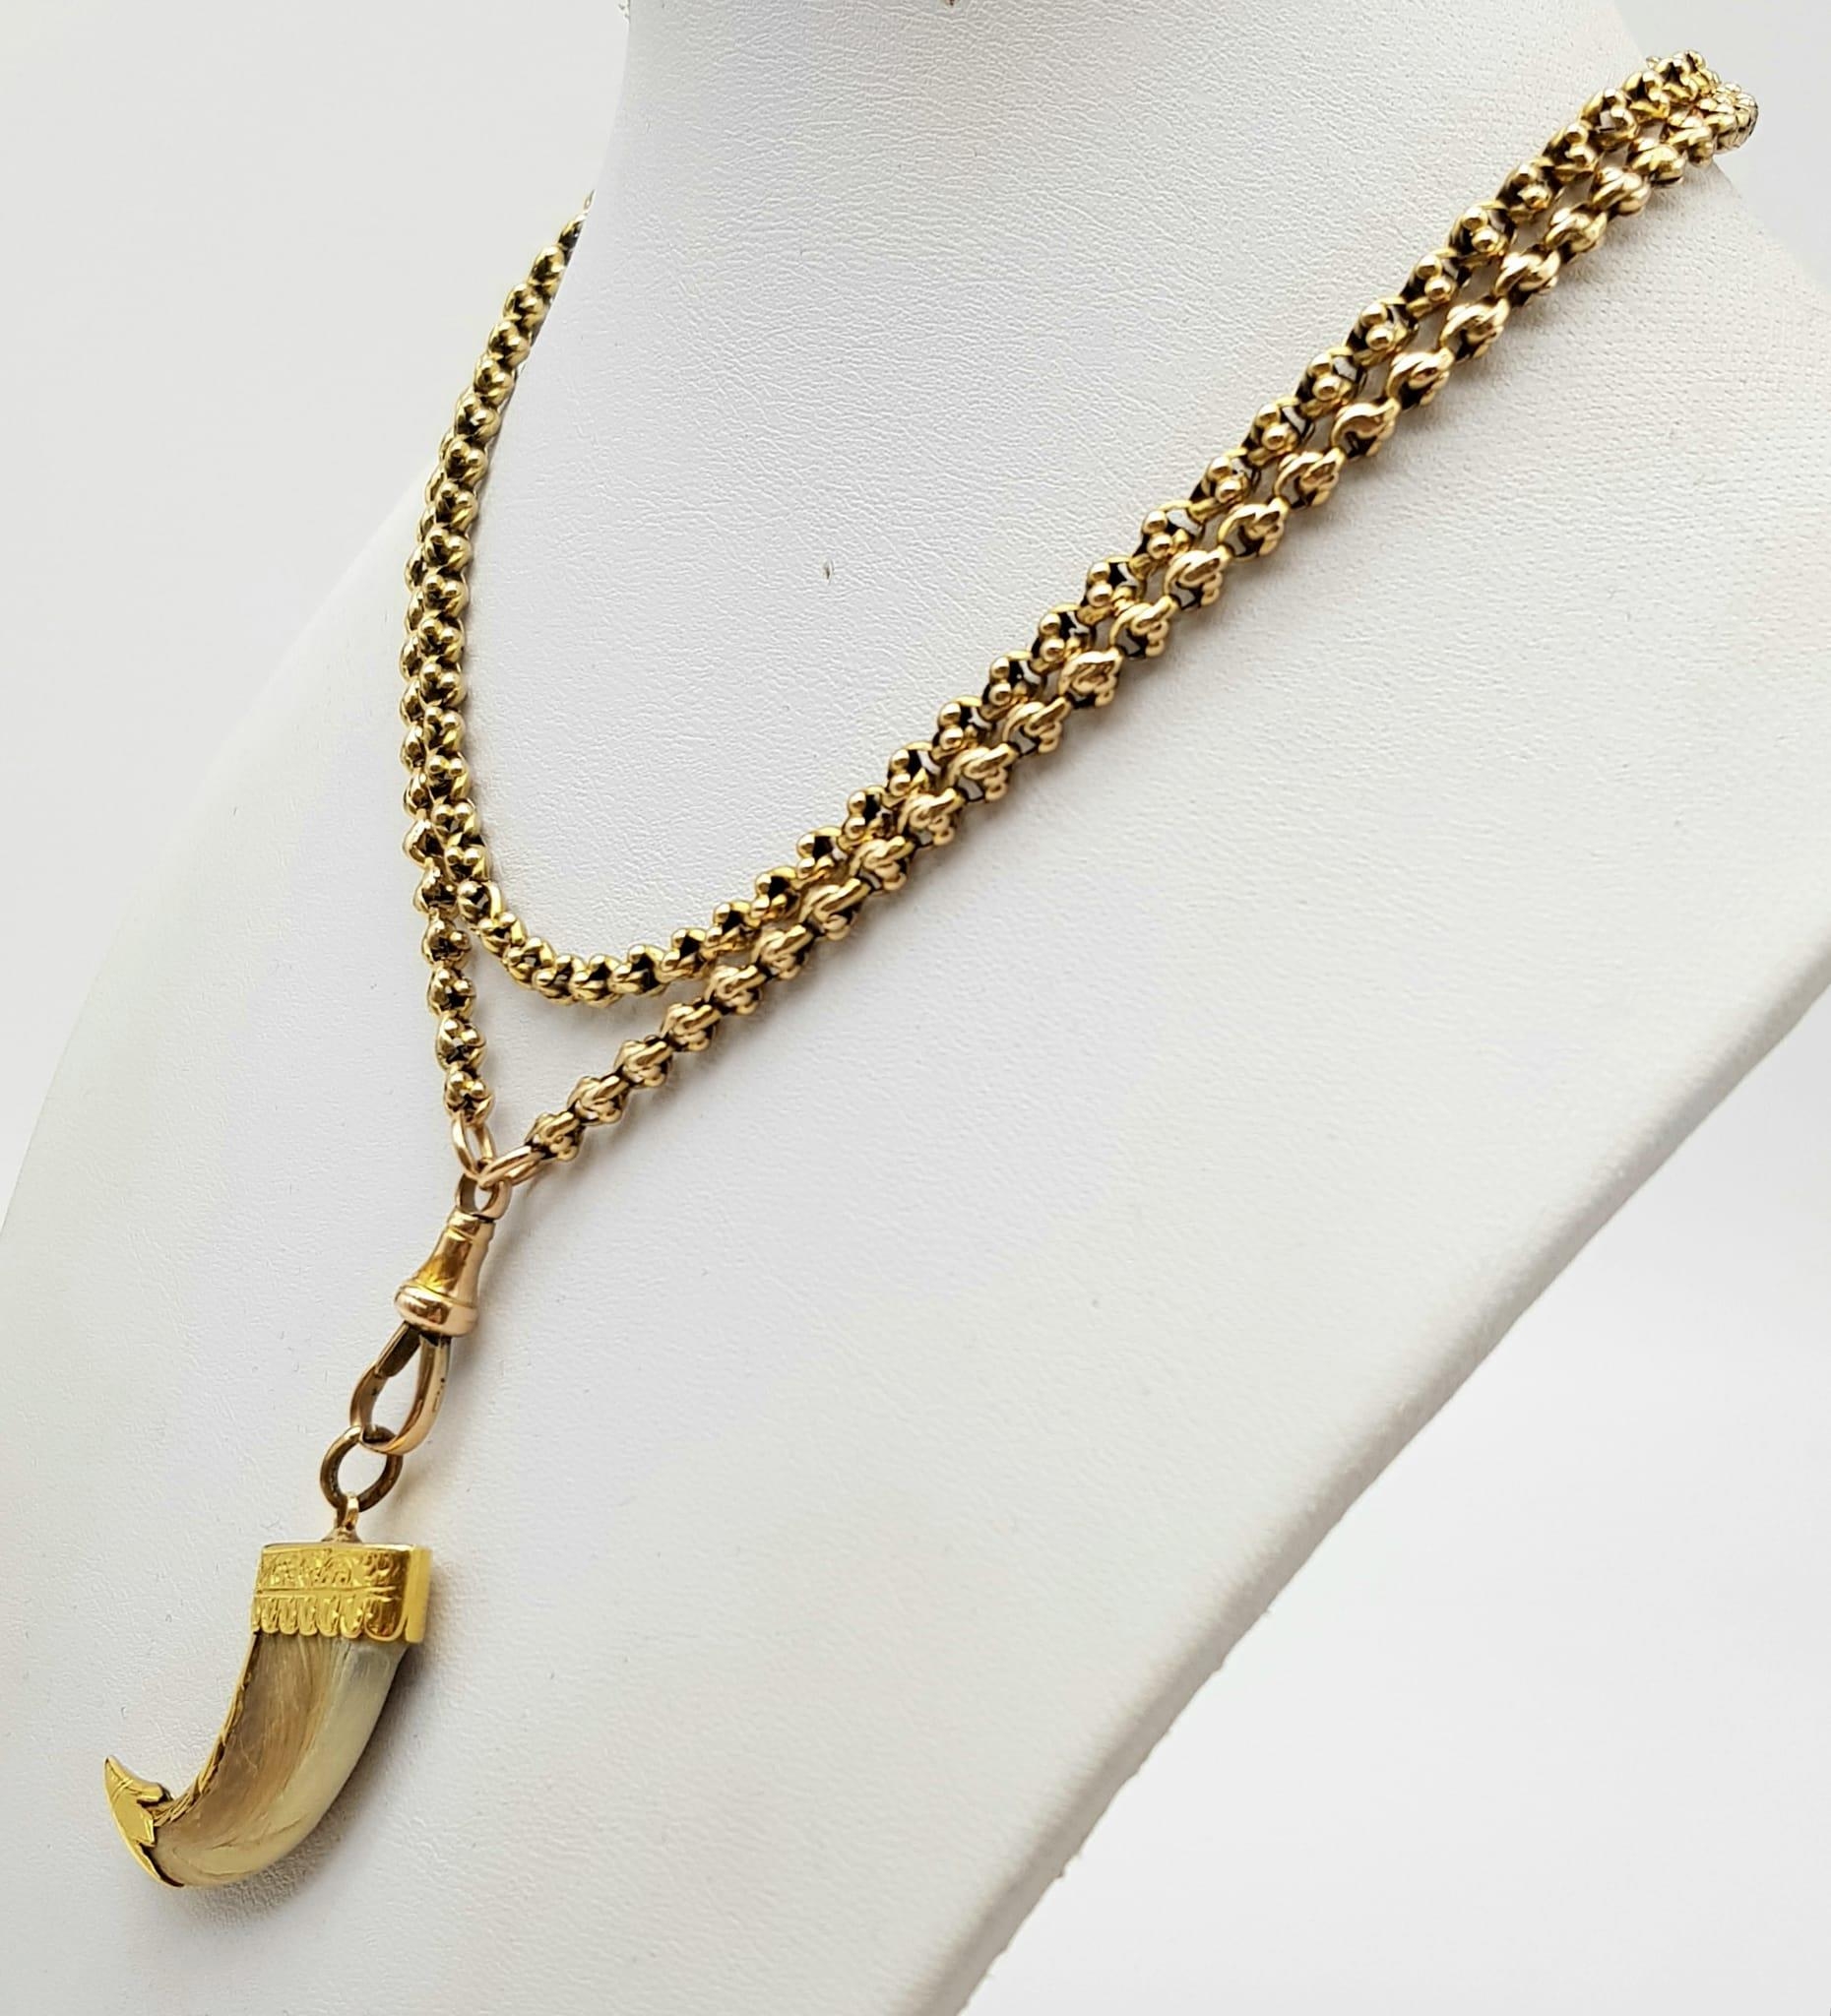 An Antique Tiger Claw Set in 18K Yellow Gold - Presented on an Antique 9K Gold Albert Chain. - Image 2 of 6